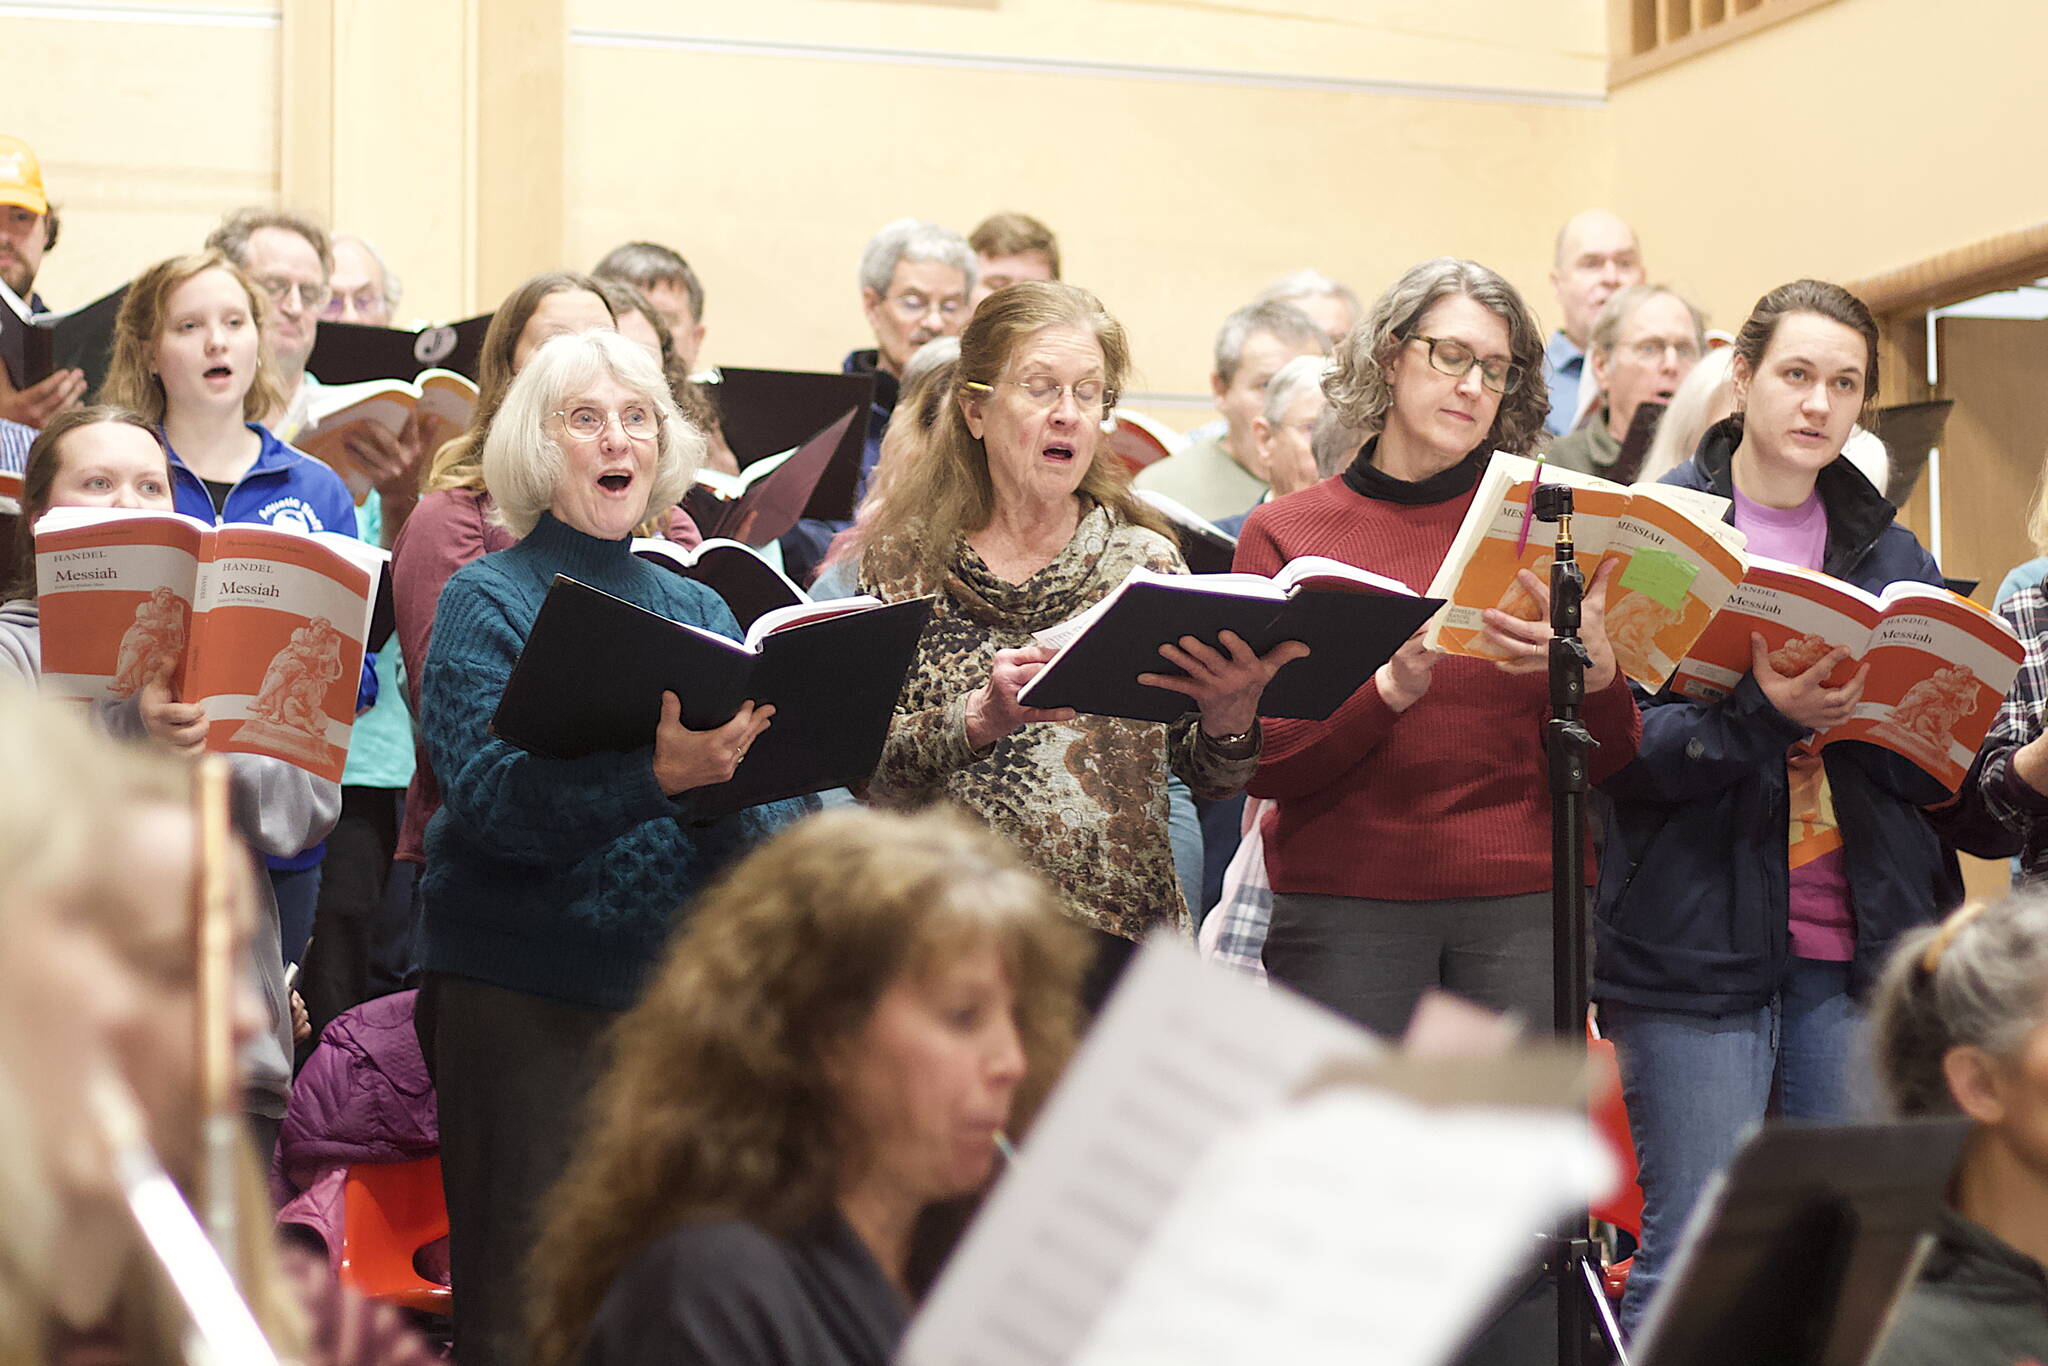 Members of the chorus rehearse a portion of Handel’s “Messiah” on Wednesday evening at Ḵunéix̱ Hídi Northern Light United Church. “Part I” and the “Hallelujah Chorus” of the oratorio are scheduled to be performed at the church at 7 p.m. Saturday and 3 p.m. Sunday. (Mark Sabbatini / Juneau Empire)